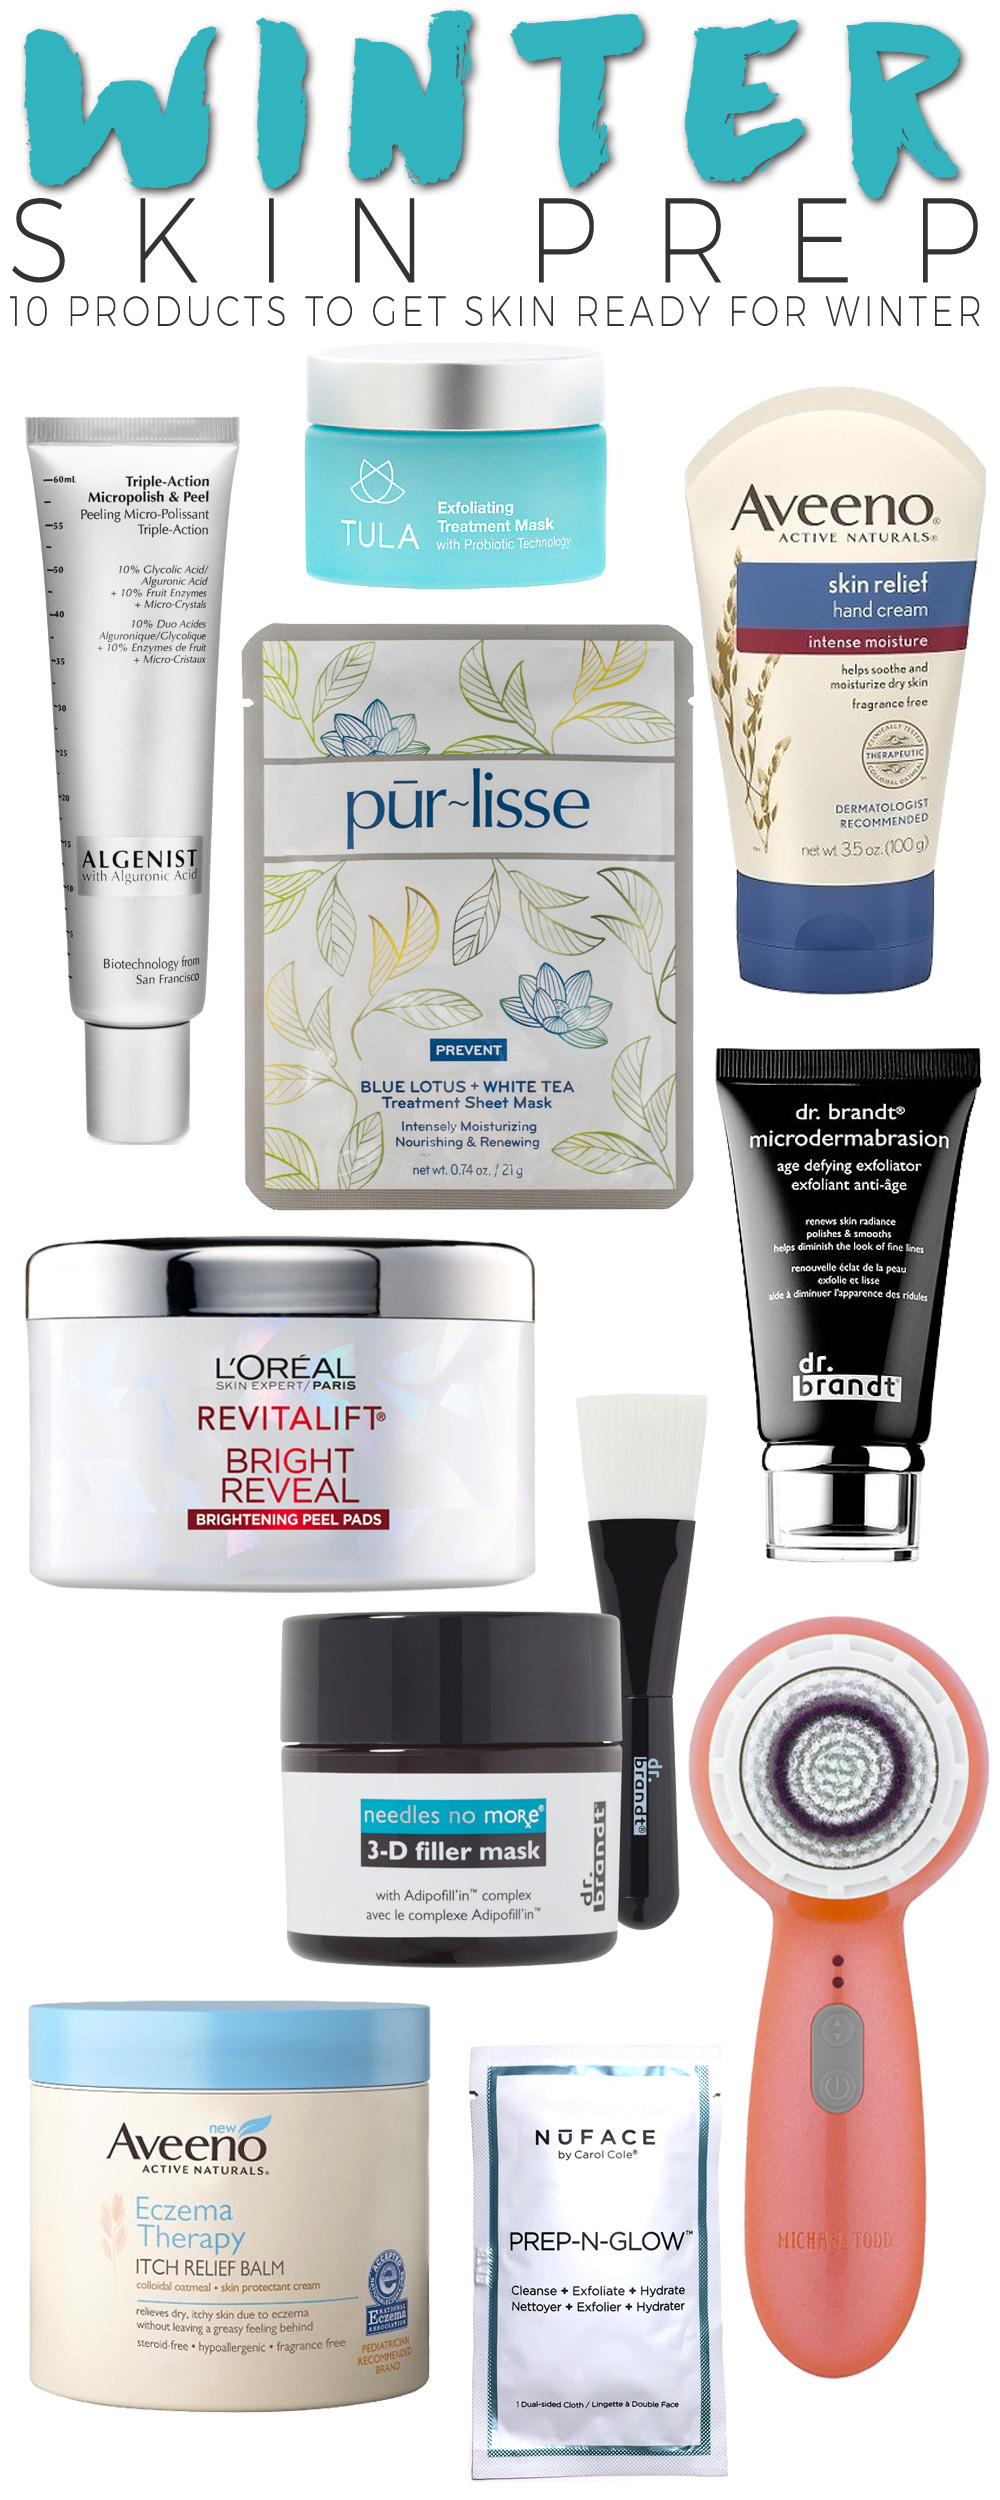 10 Products to Get Skin Ready for Winter